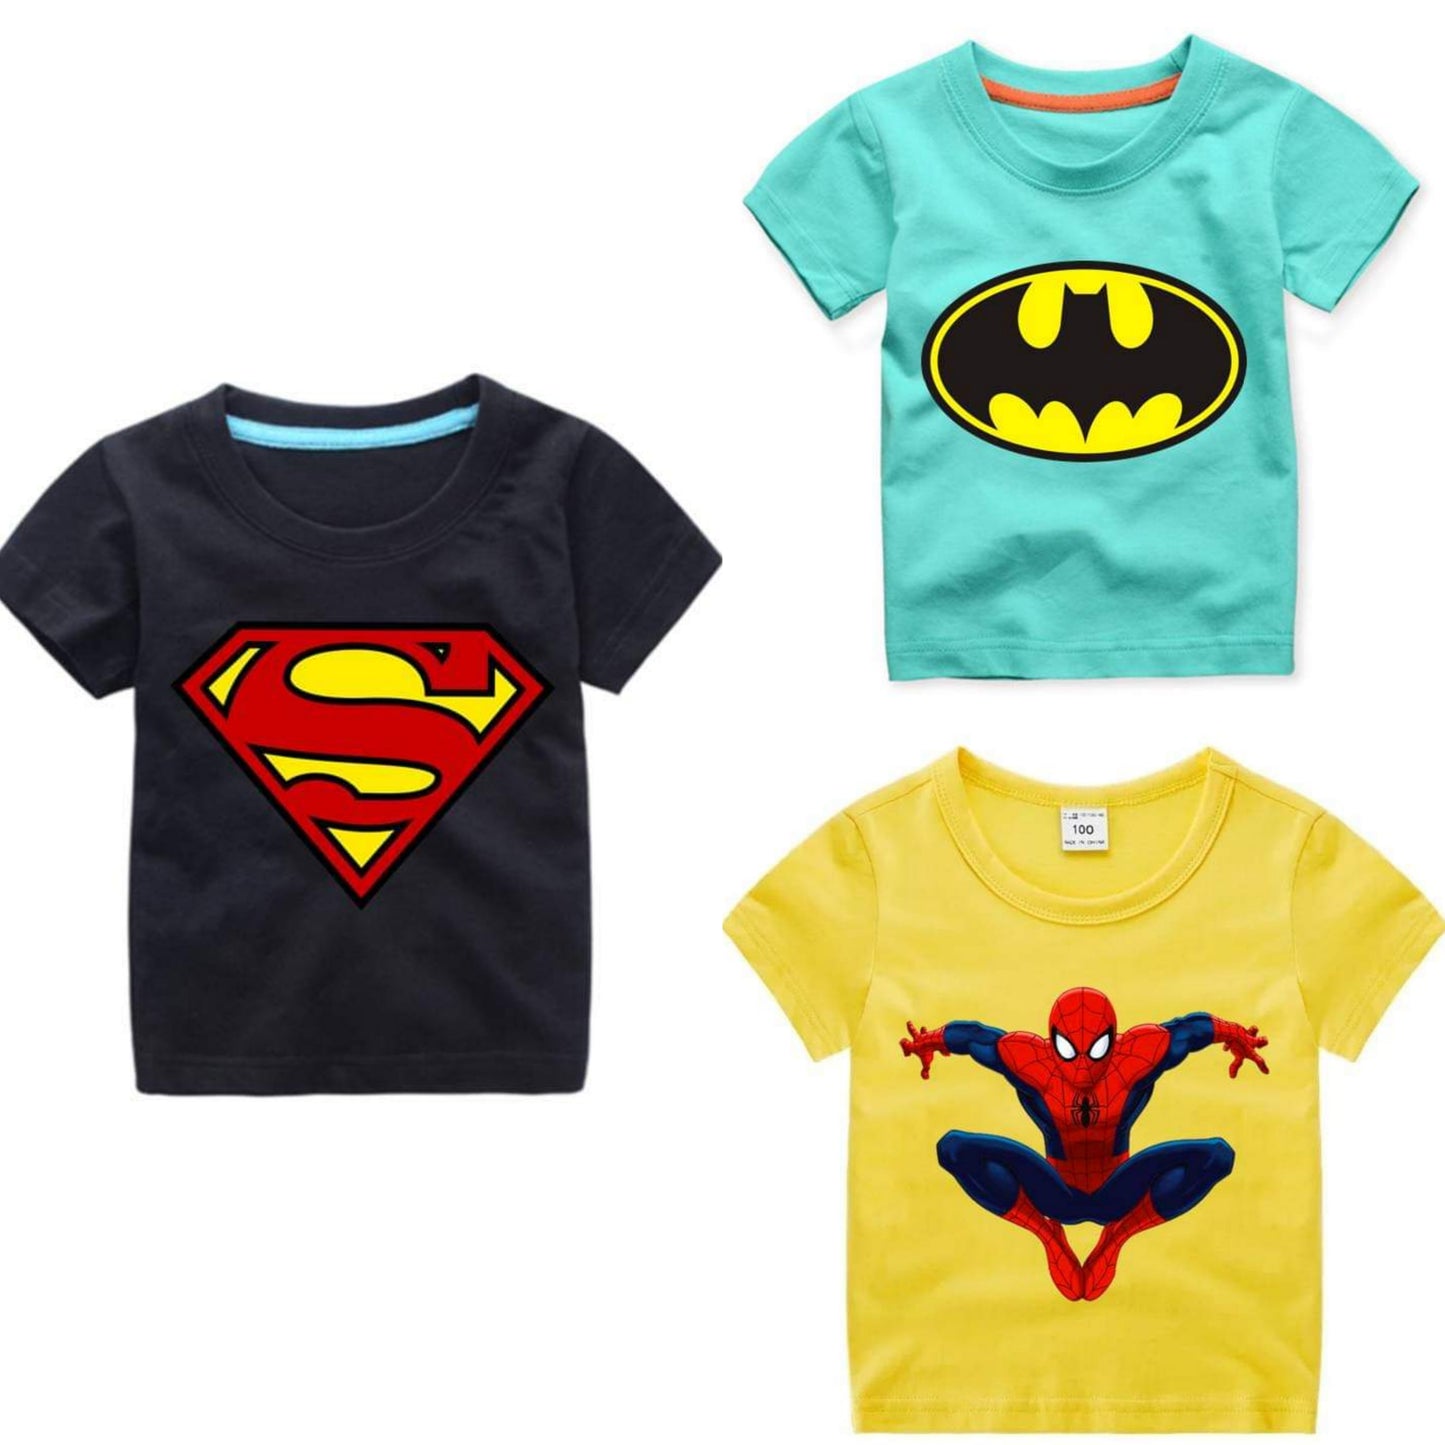 Buy 2 Get 1 Free Printed Half Sleeve T Shirts for Kids